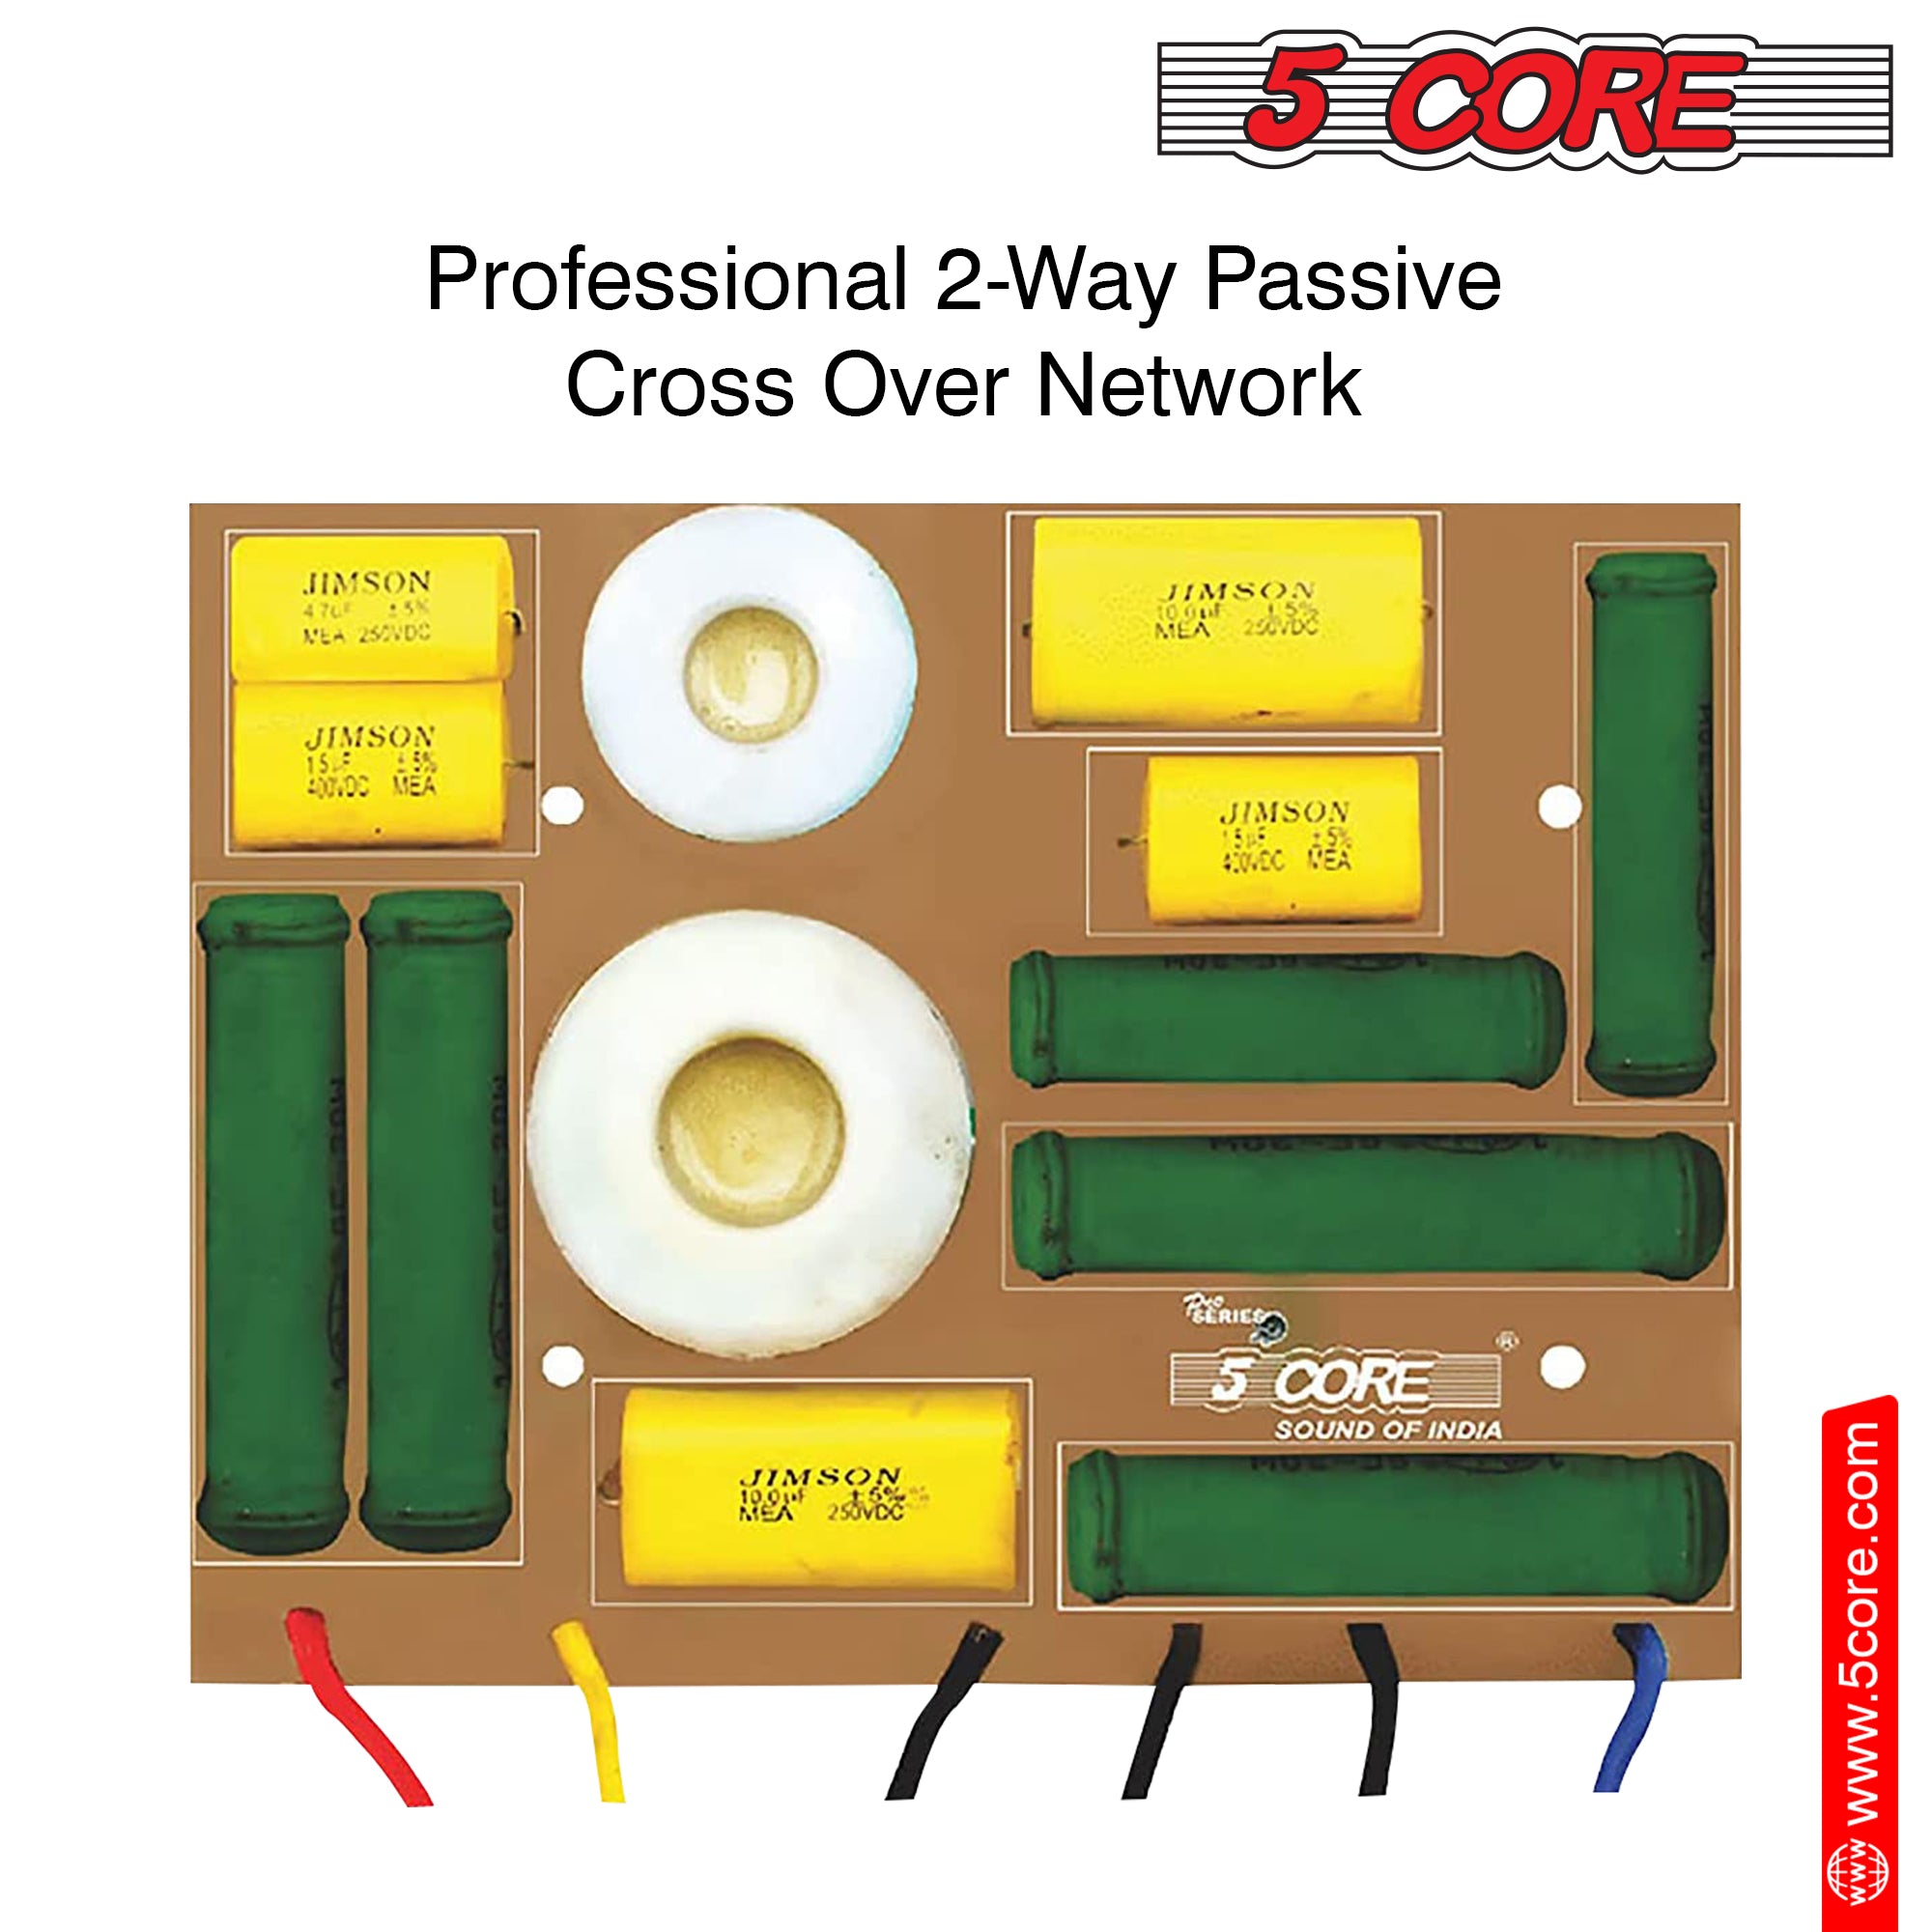 5 Core Professional 2 Way Passive Crossover Network High Performance & Low Resistance Air Core Coil